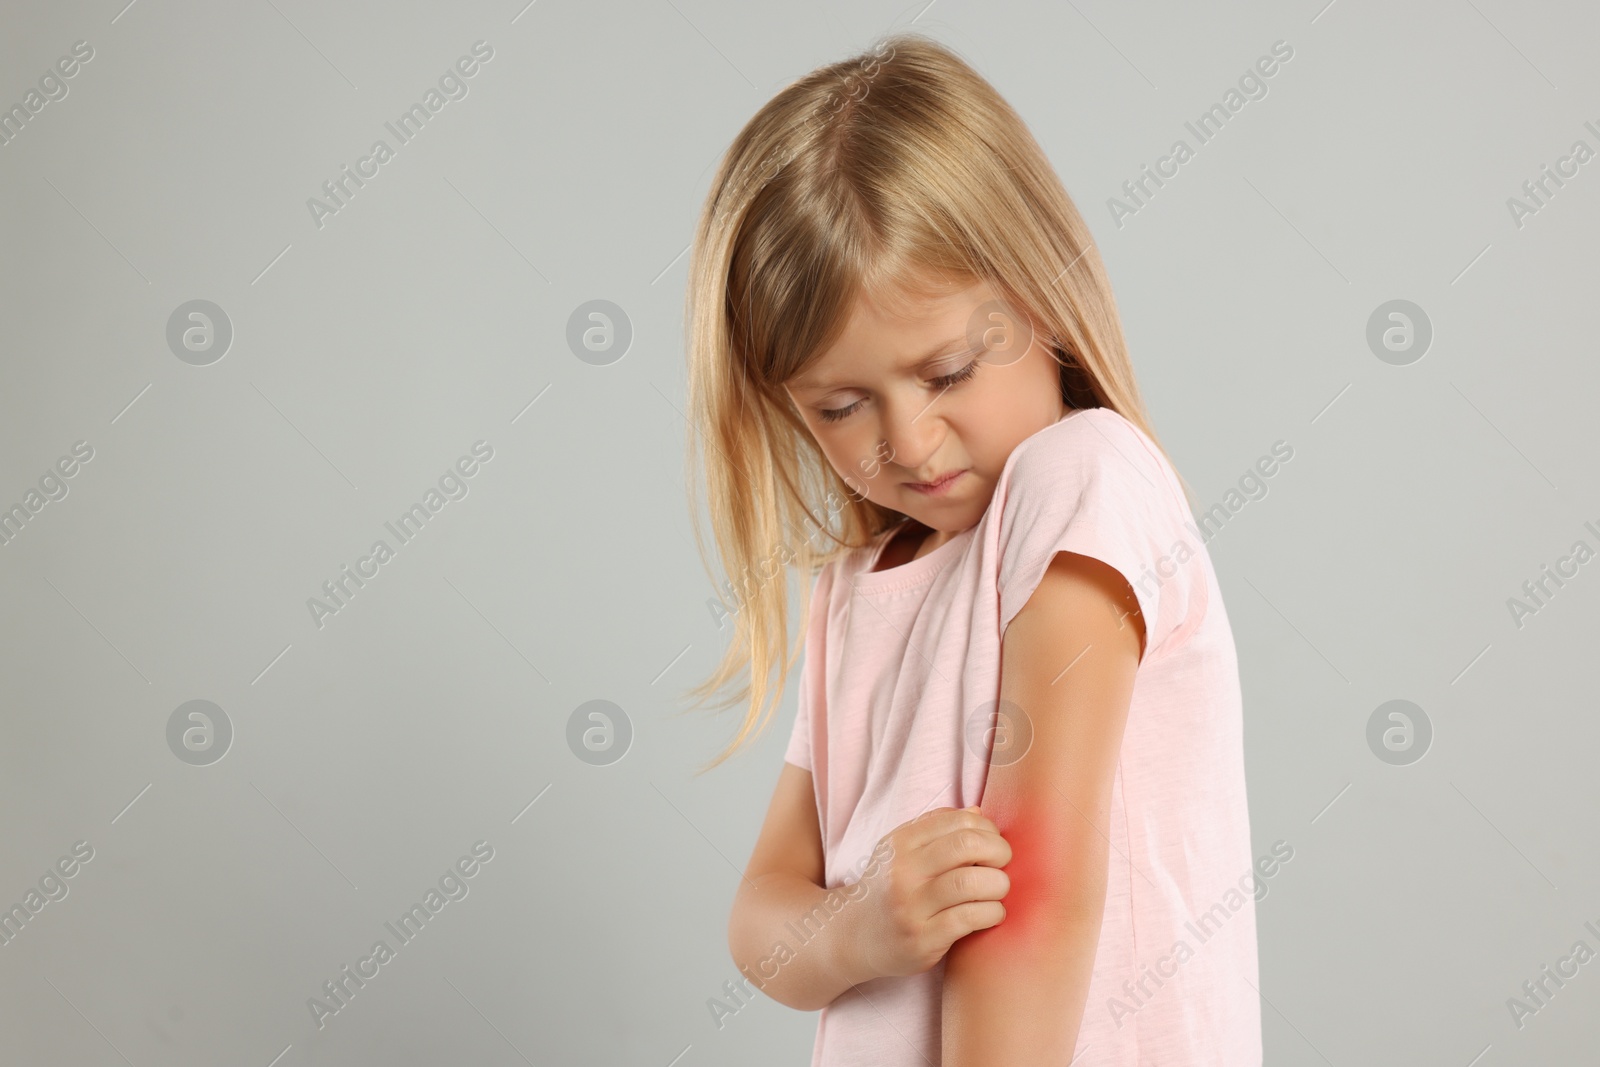 Photo of Suffering from allergy. Little girl scratching her arm on light gray background, space for text